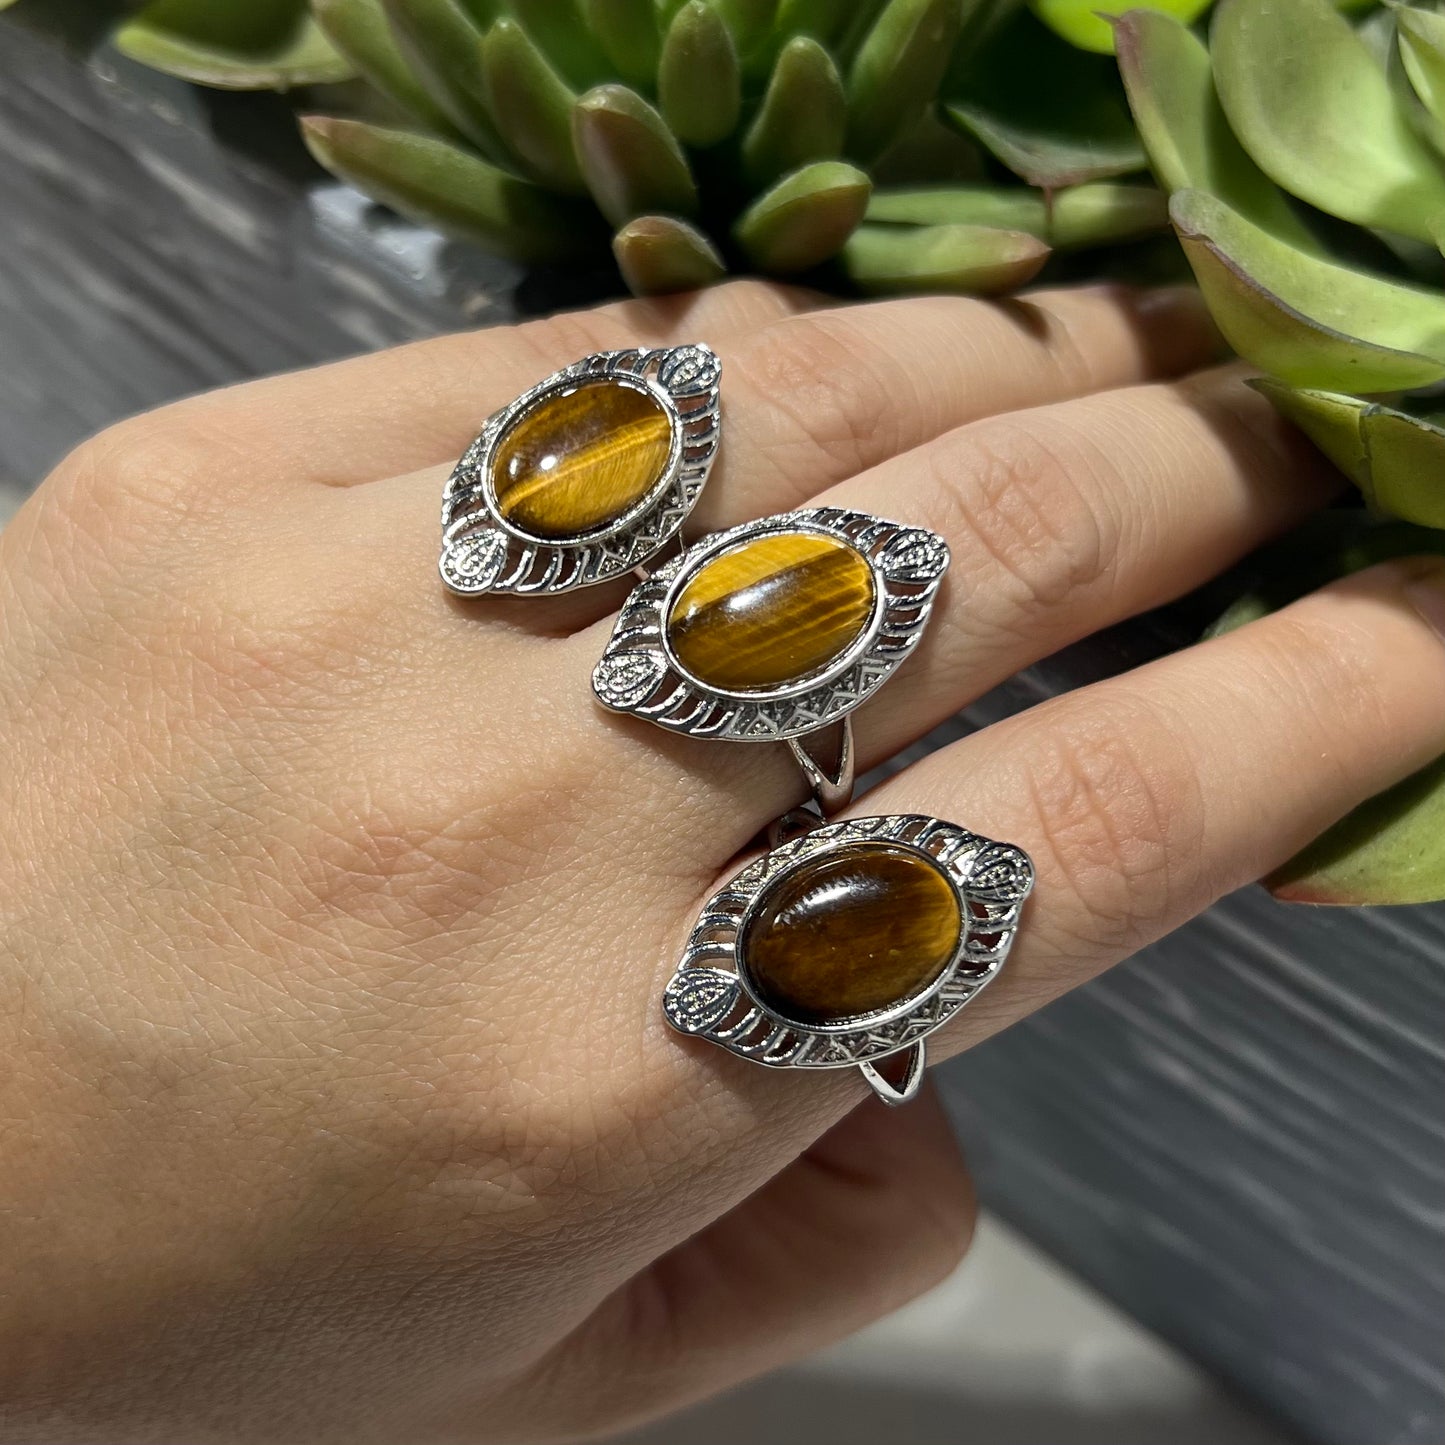 Tiger's Eye Vintage Adjustable Ring - Jewelry  from China Wholesaler